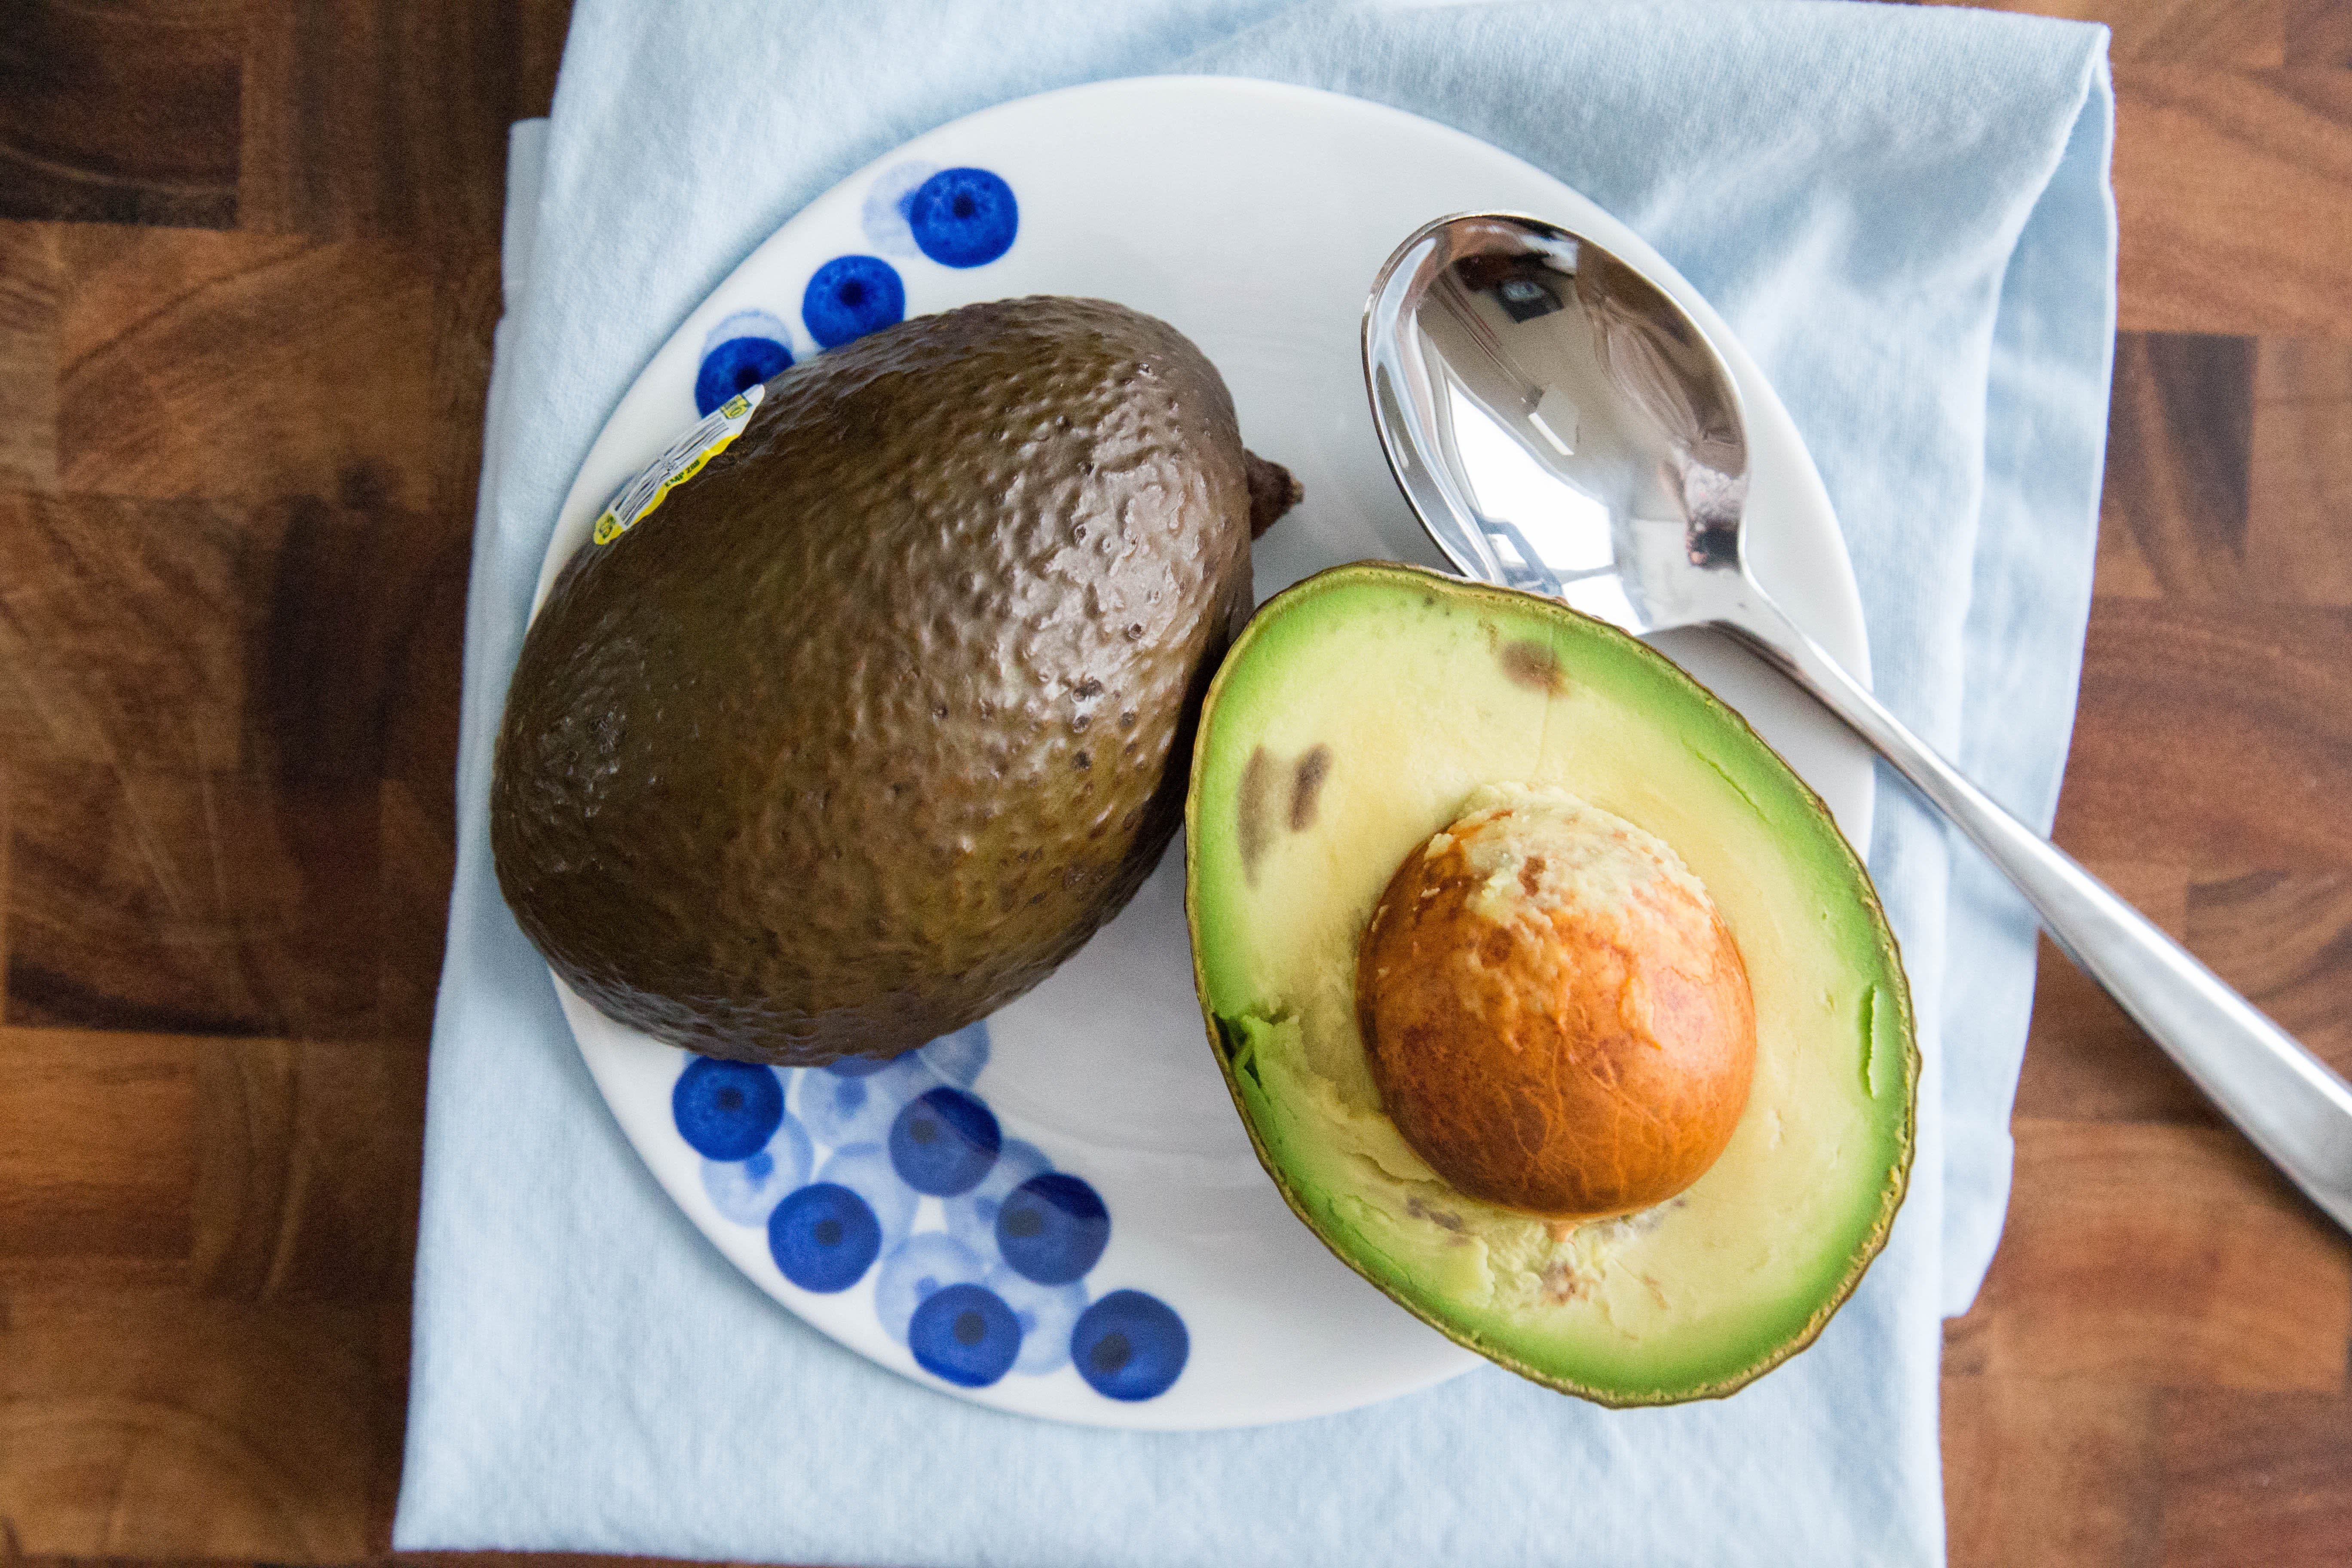 A ripe avocado sits prominently, flanked by a flurry of diced